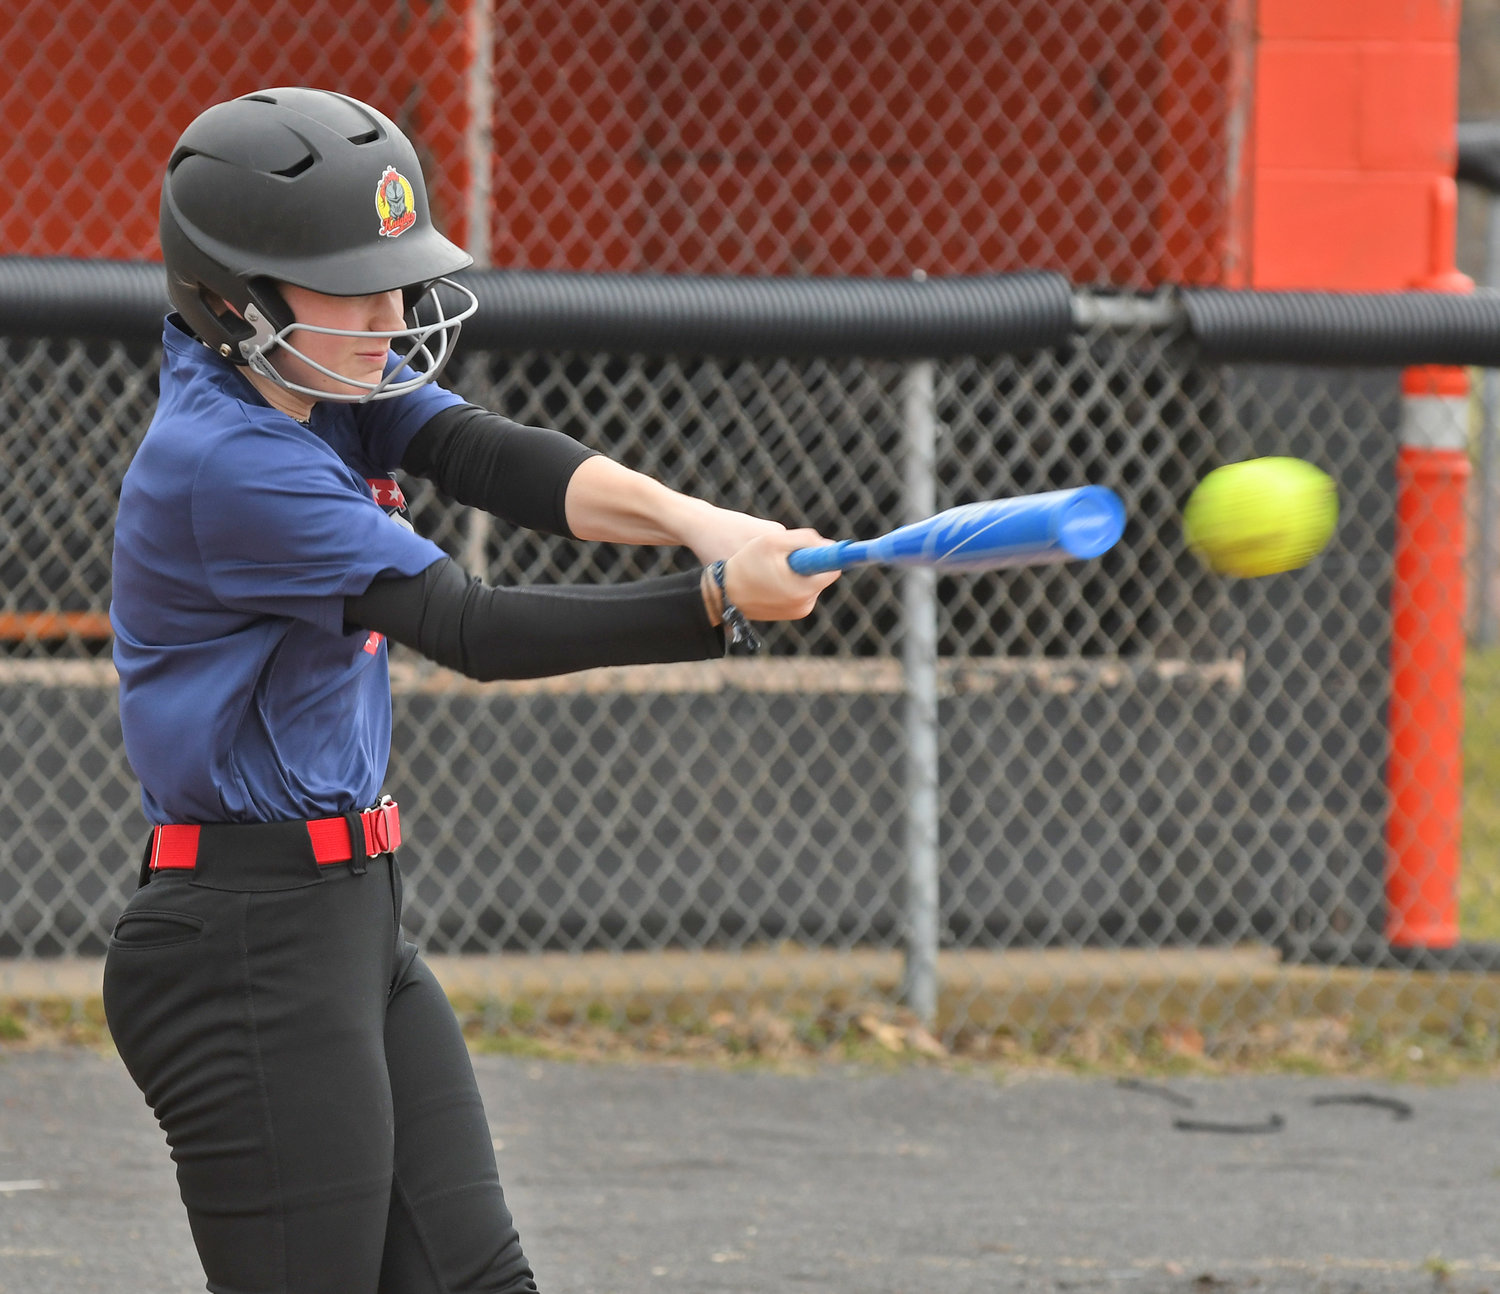 RUN PRODUCER — Rome Free Academy senior shortstop Maggie Closinski hits during drills at Kost Field in pre-season. The team opens the season at 12:30 p.m. Saturday when it hosts Central Square at Kost.